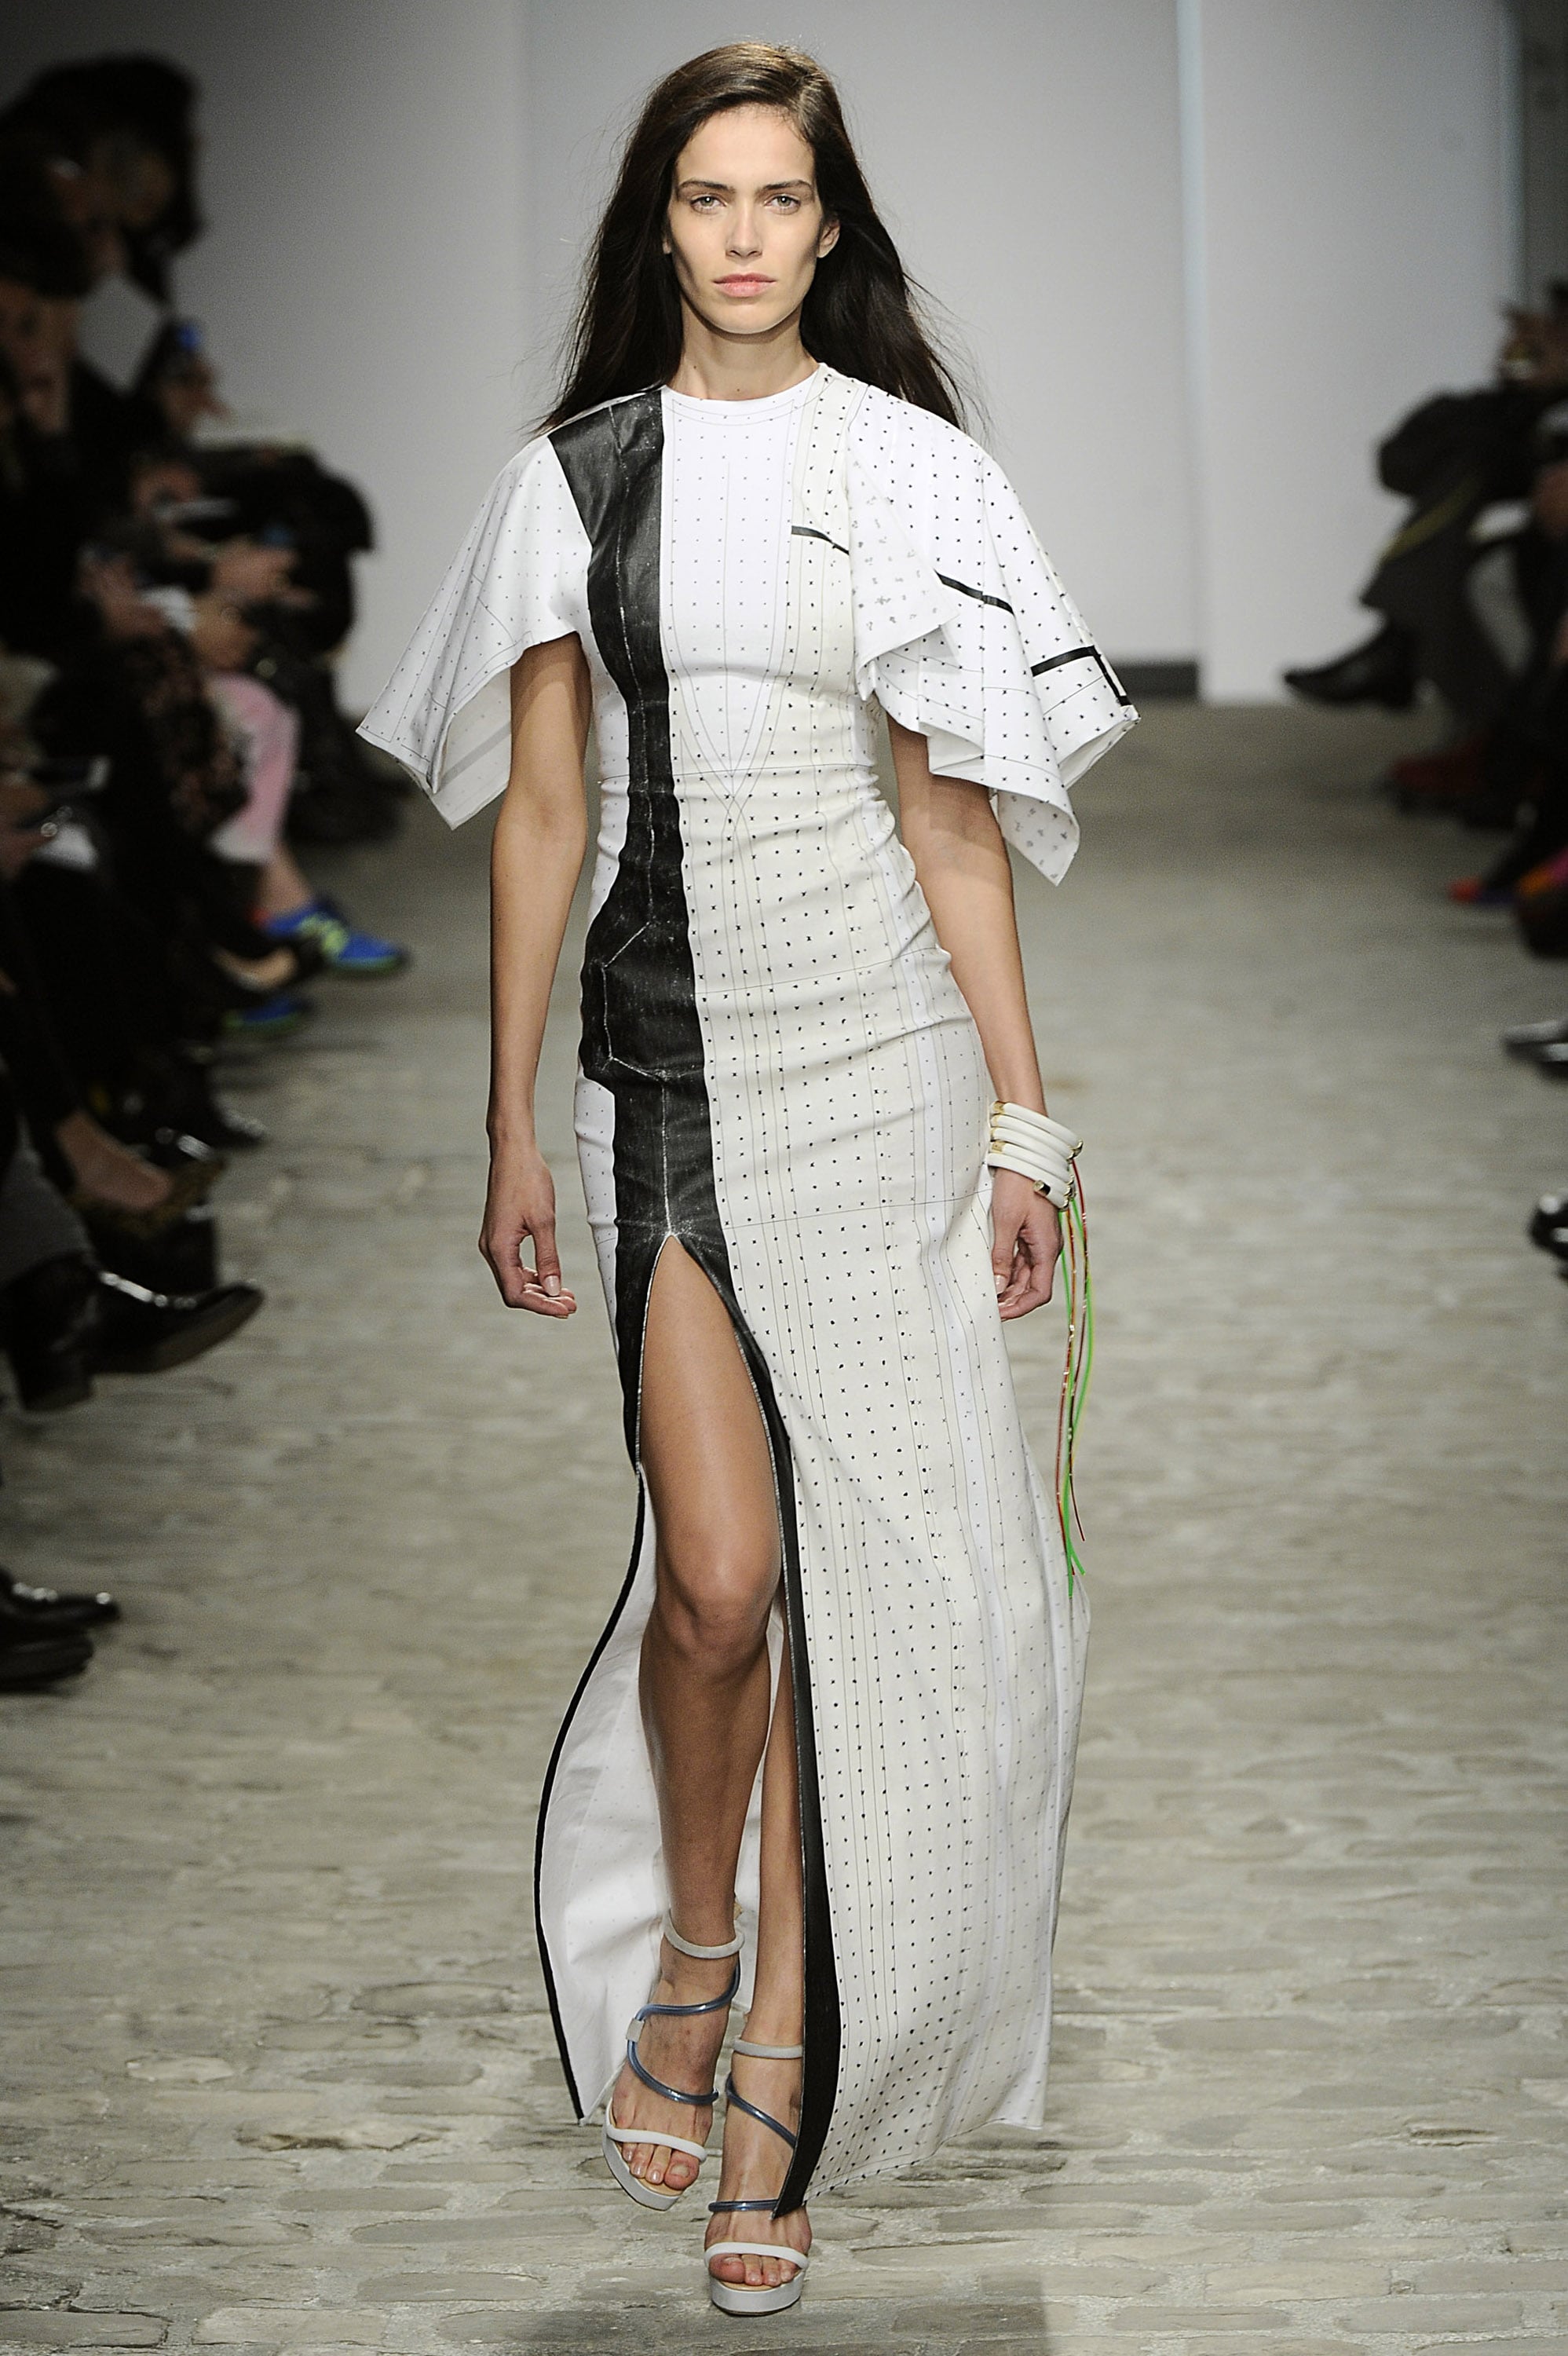 Vionnet Haute Couture Spring 2014 | So Haute Right Now: The Chicest ...